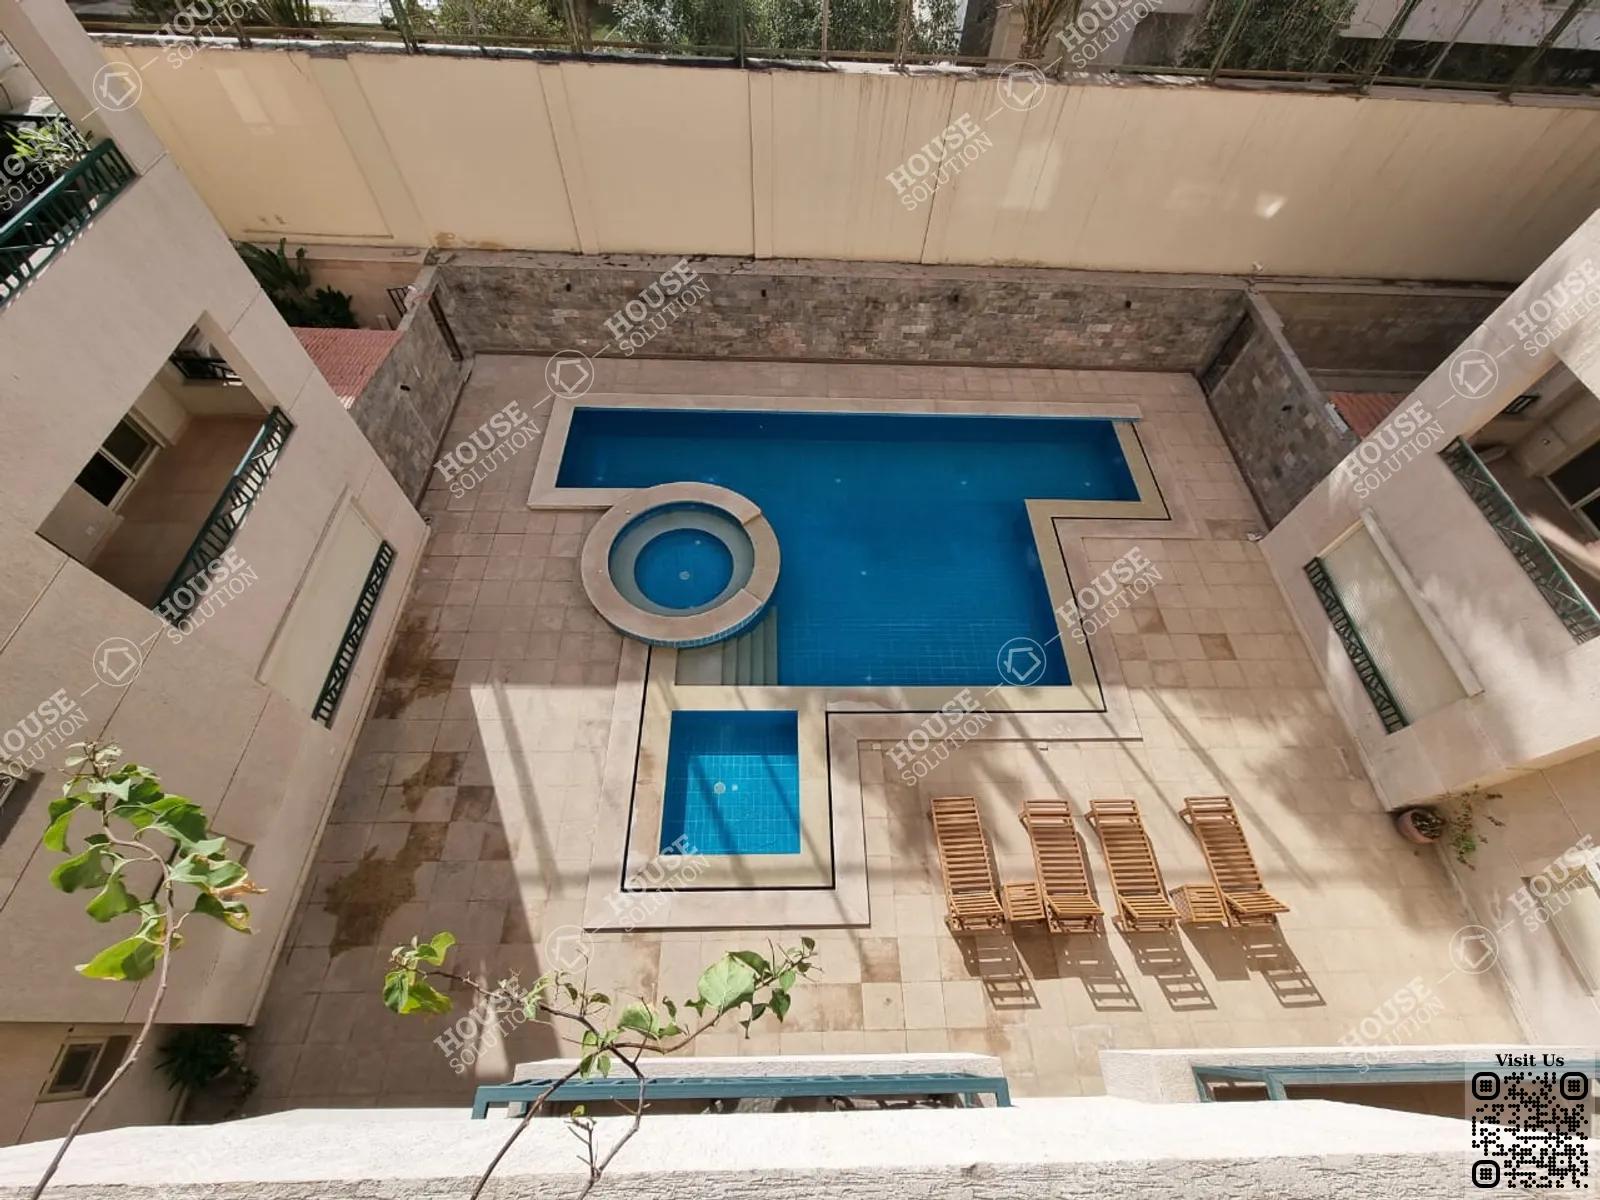 SHARED SWIMMING POOL  @ Apartments For Rent In Maadi Maadi Sarayat Area: 140 m² consists of 2 Bedrooms 3 Bathrooms Modern furnished 5 stars #5286-2